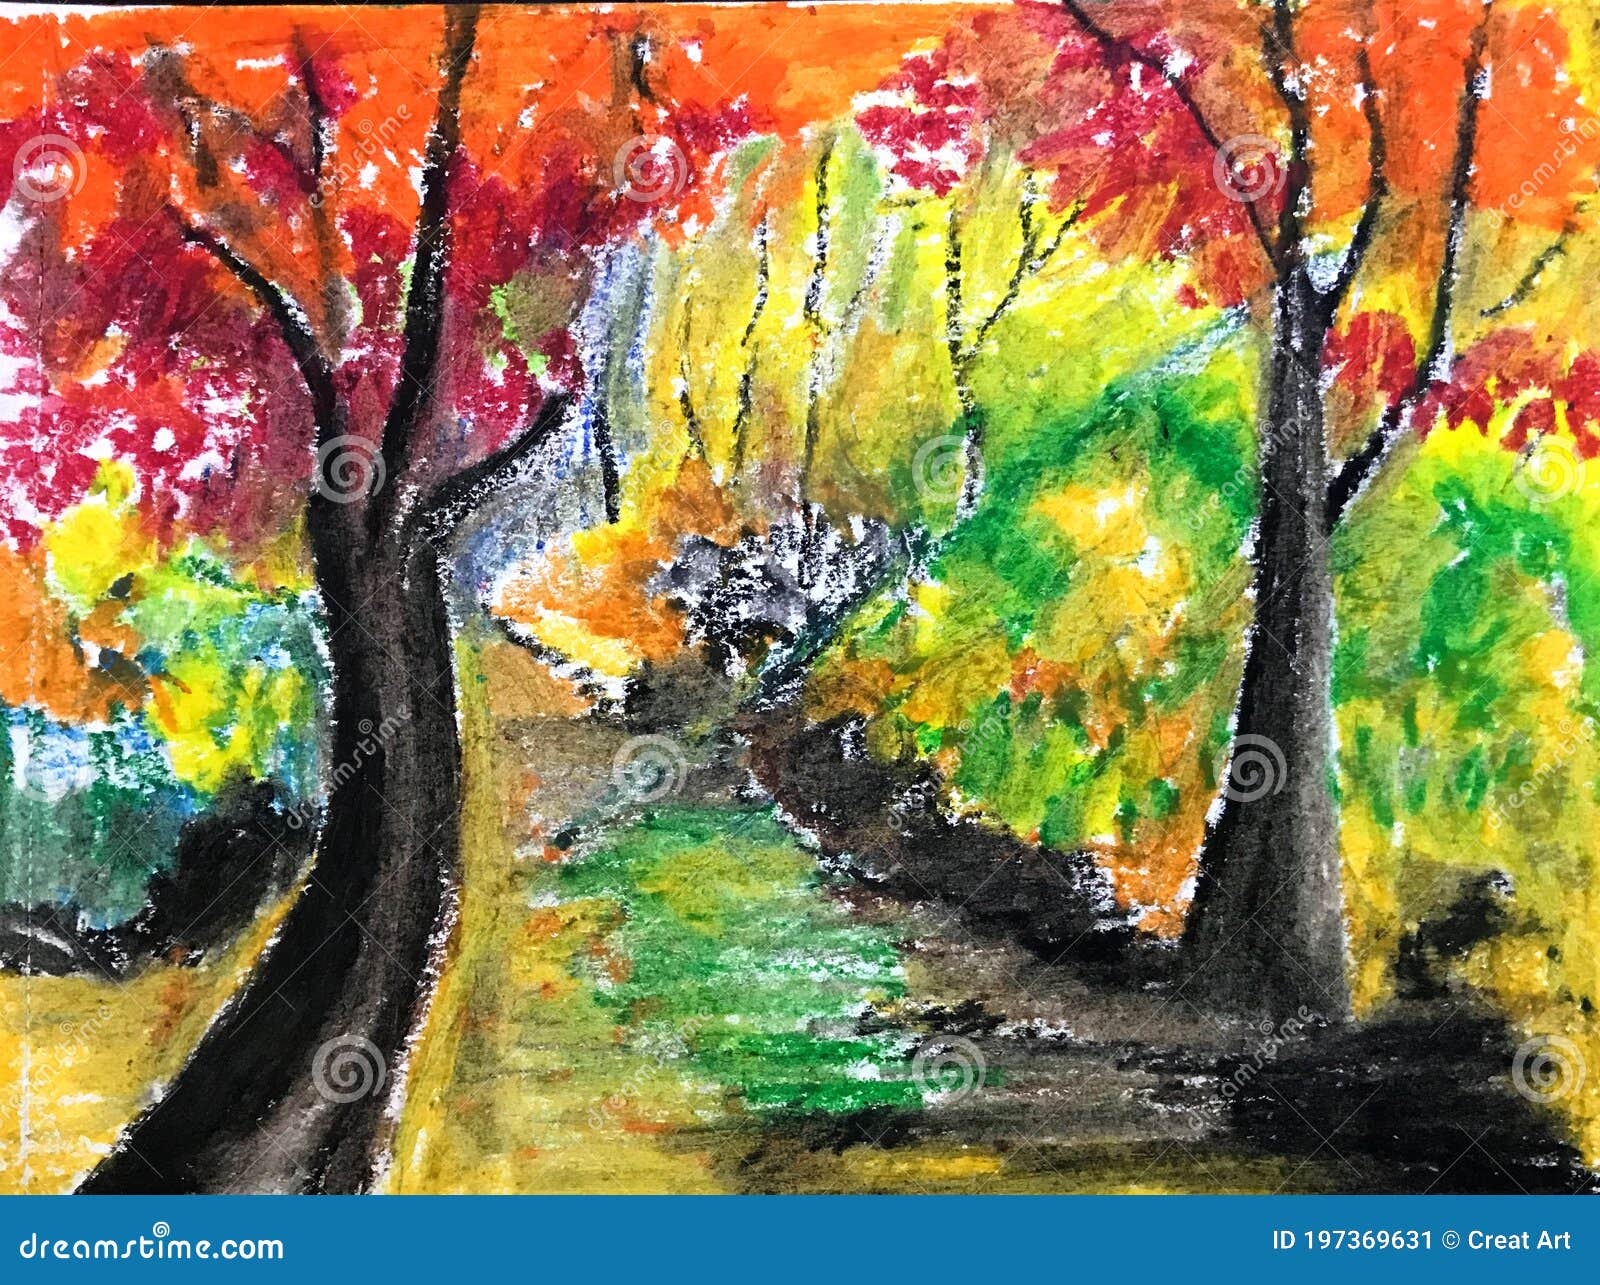 Background Autmn Trees and Flowers Oil Pastel Painting Stock Image - Image of paintings, painting: 197369631